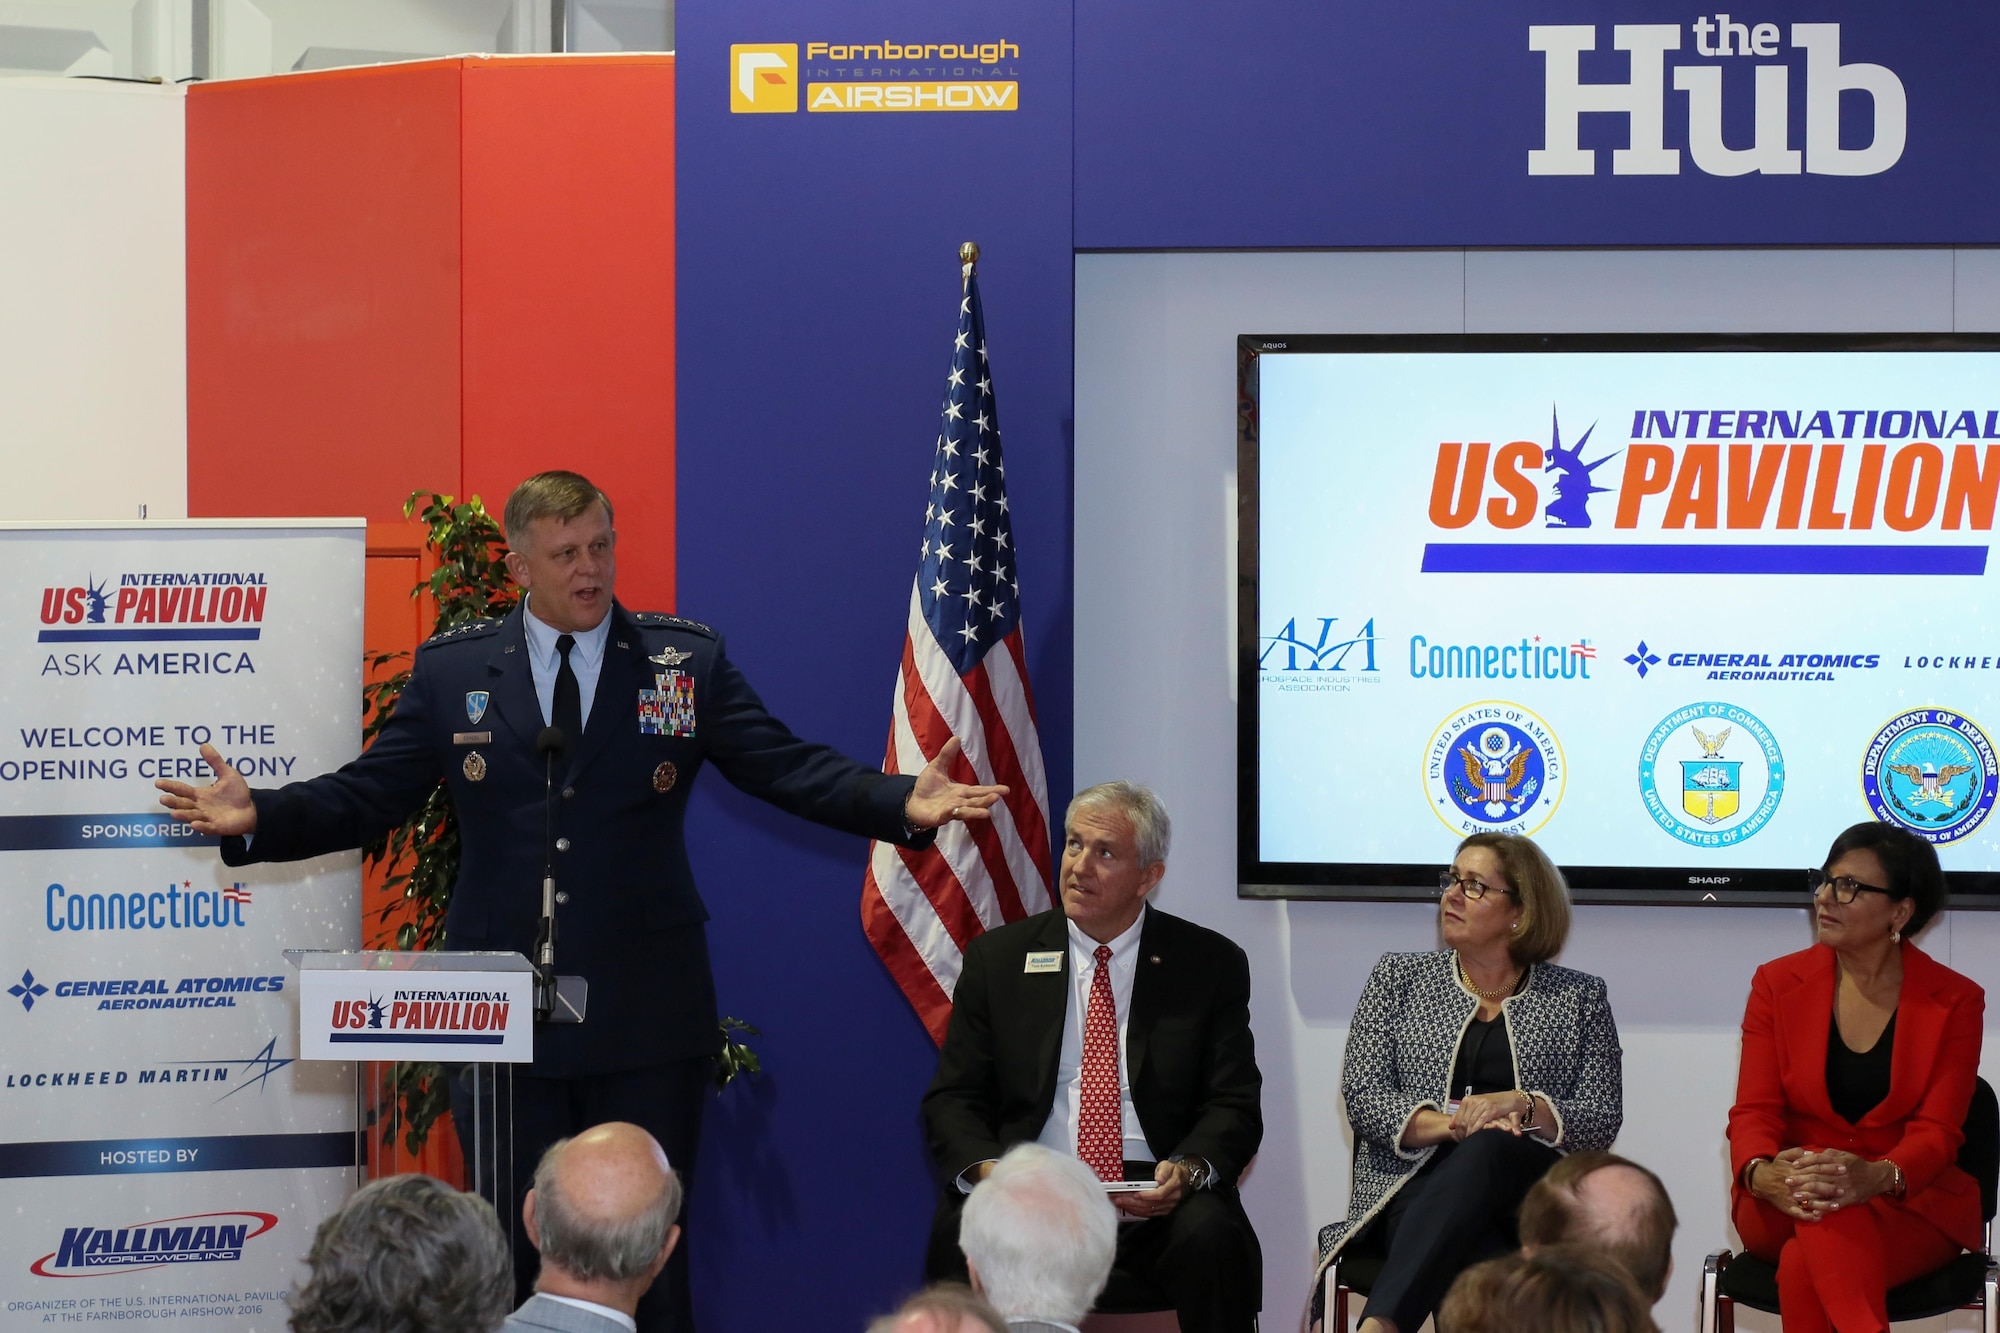 Gen. Frank Gorenc, U.S. Air Forces in Europe and Air Forces Africa commander, speaks to attendees of an opening day ceremony at the U.S. pavilion, July 11, 2016, at the Farnborough International Air Show. Held every two years, the air show represents a unique opportunity for the U.S., along with other military allies, to showcase its leadership in aerospace technologies while supporting various armament procurement competitions taking place throughout Europe. (Courtesy photo by Chris Meyer)